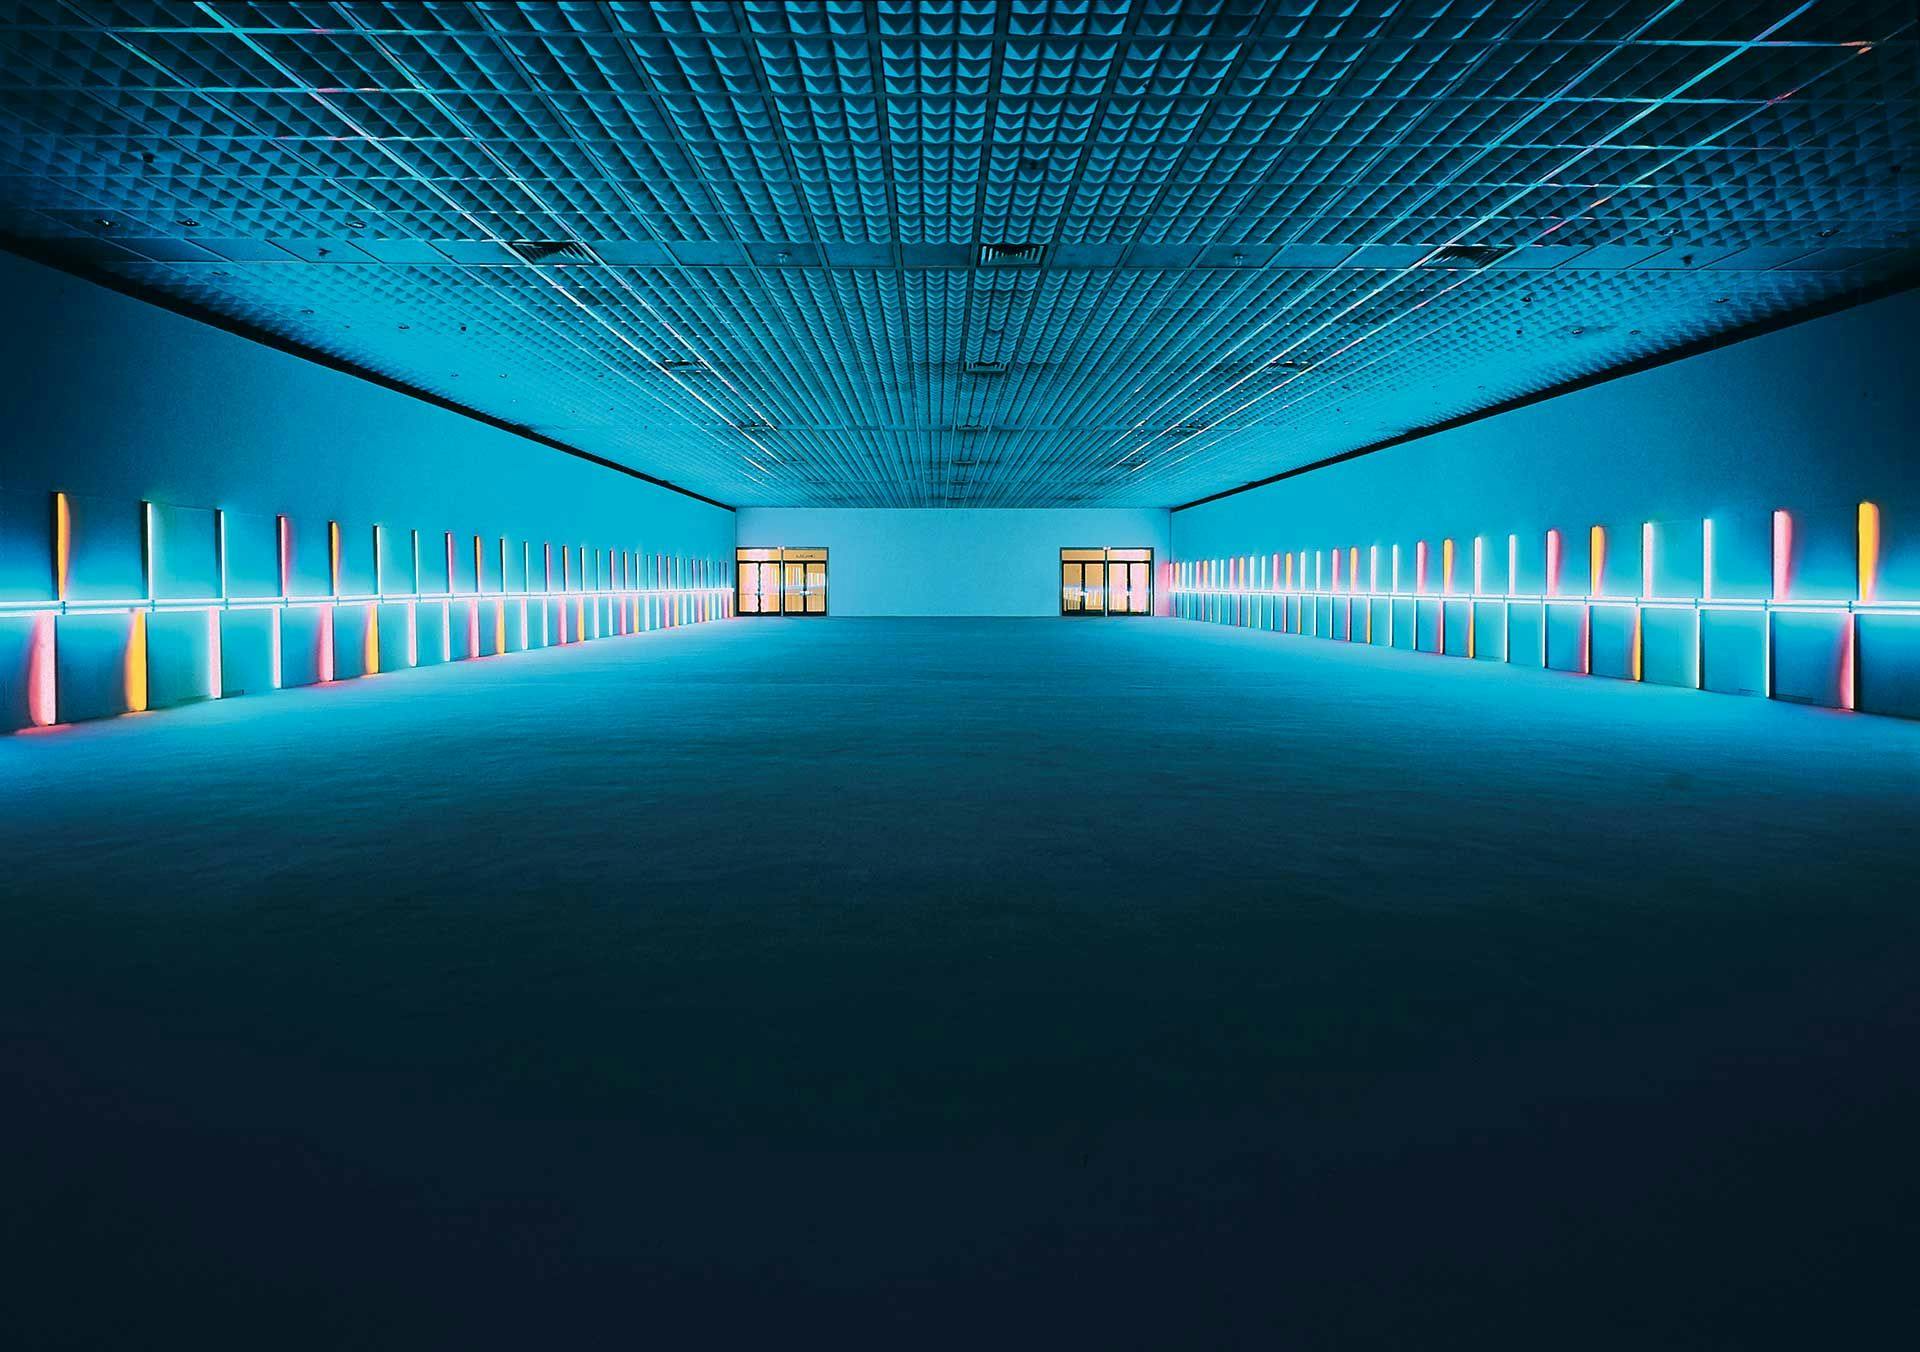 A large-scale sculptural installation in pink, yellow, green, and blue fluorescent light bby Dan Flavin, titled untitled (to Saskia, Sixtina, Thordis), dated 1973.